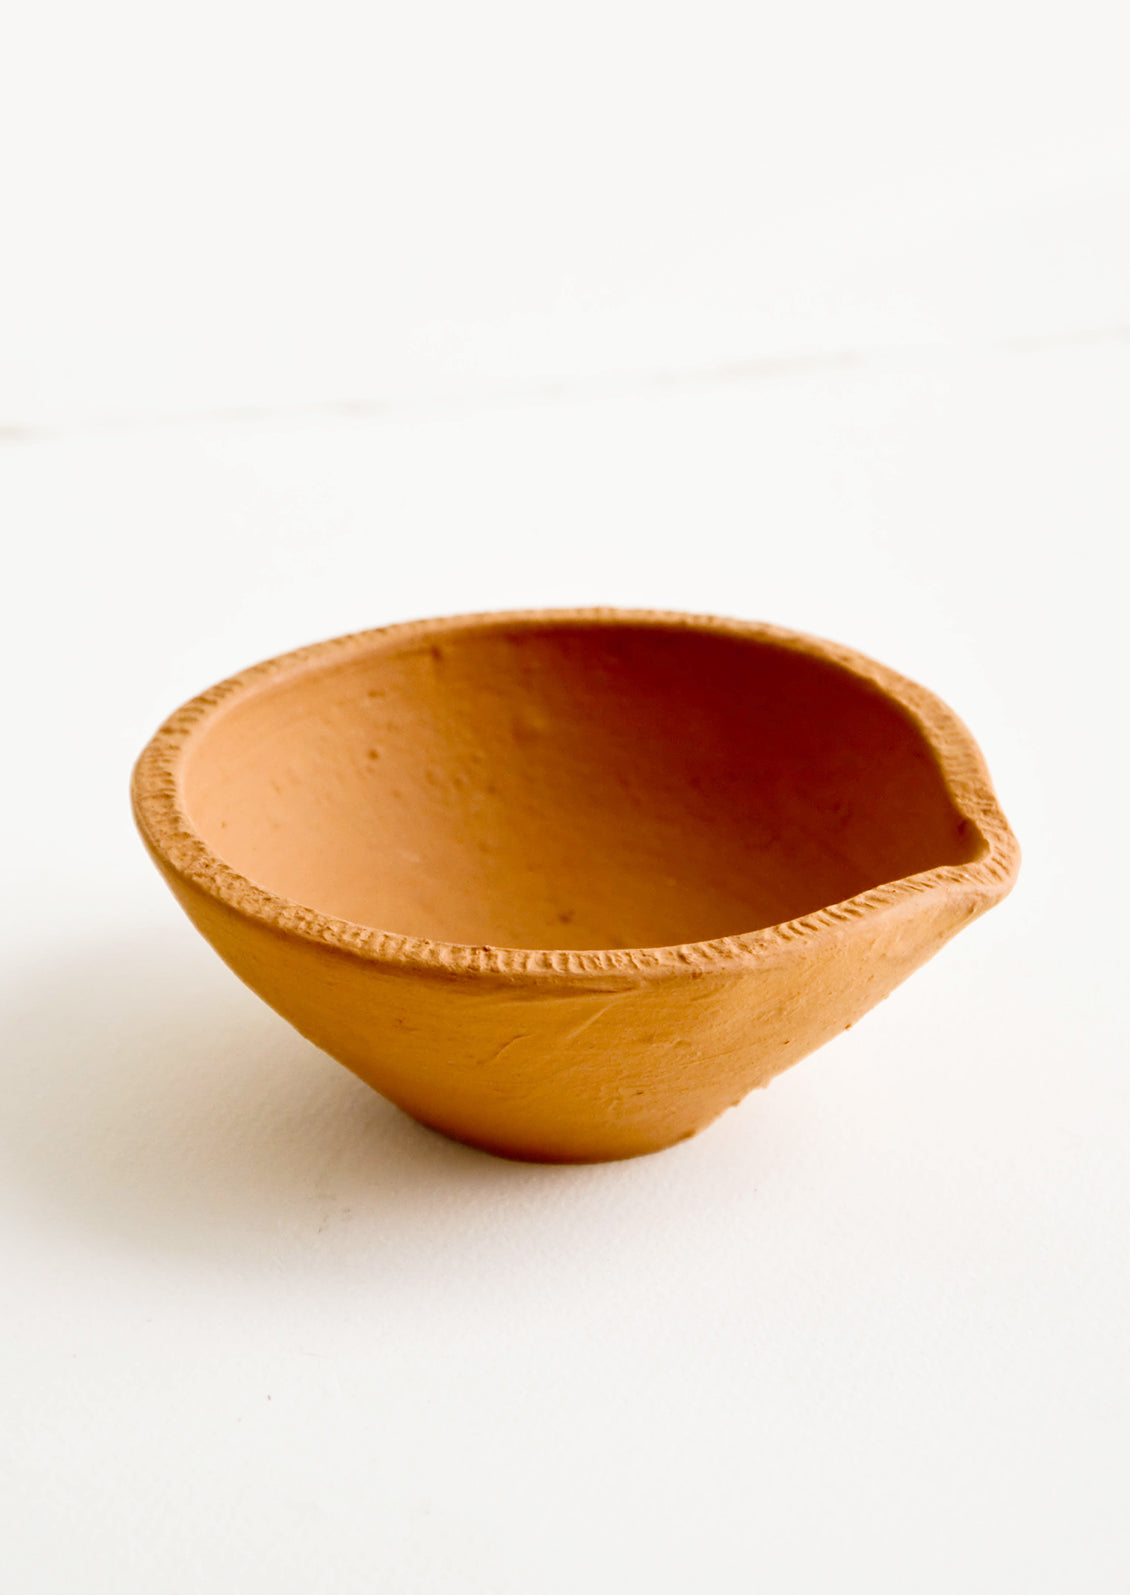 Clay Coyote Mixing Bowl with tiny wire whisk for whipping batter